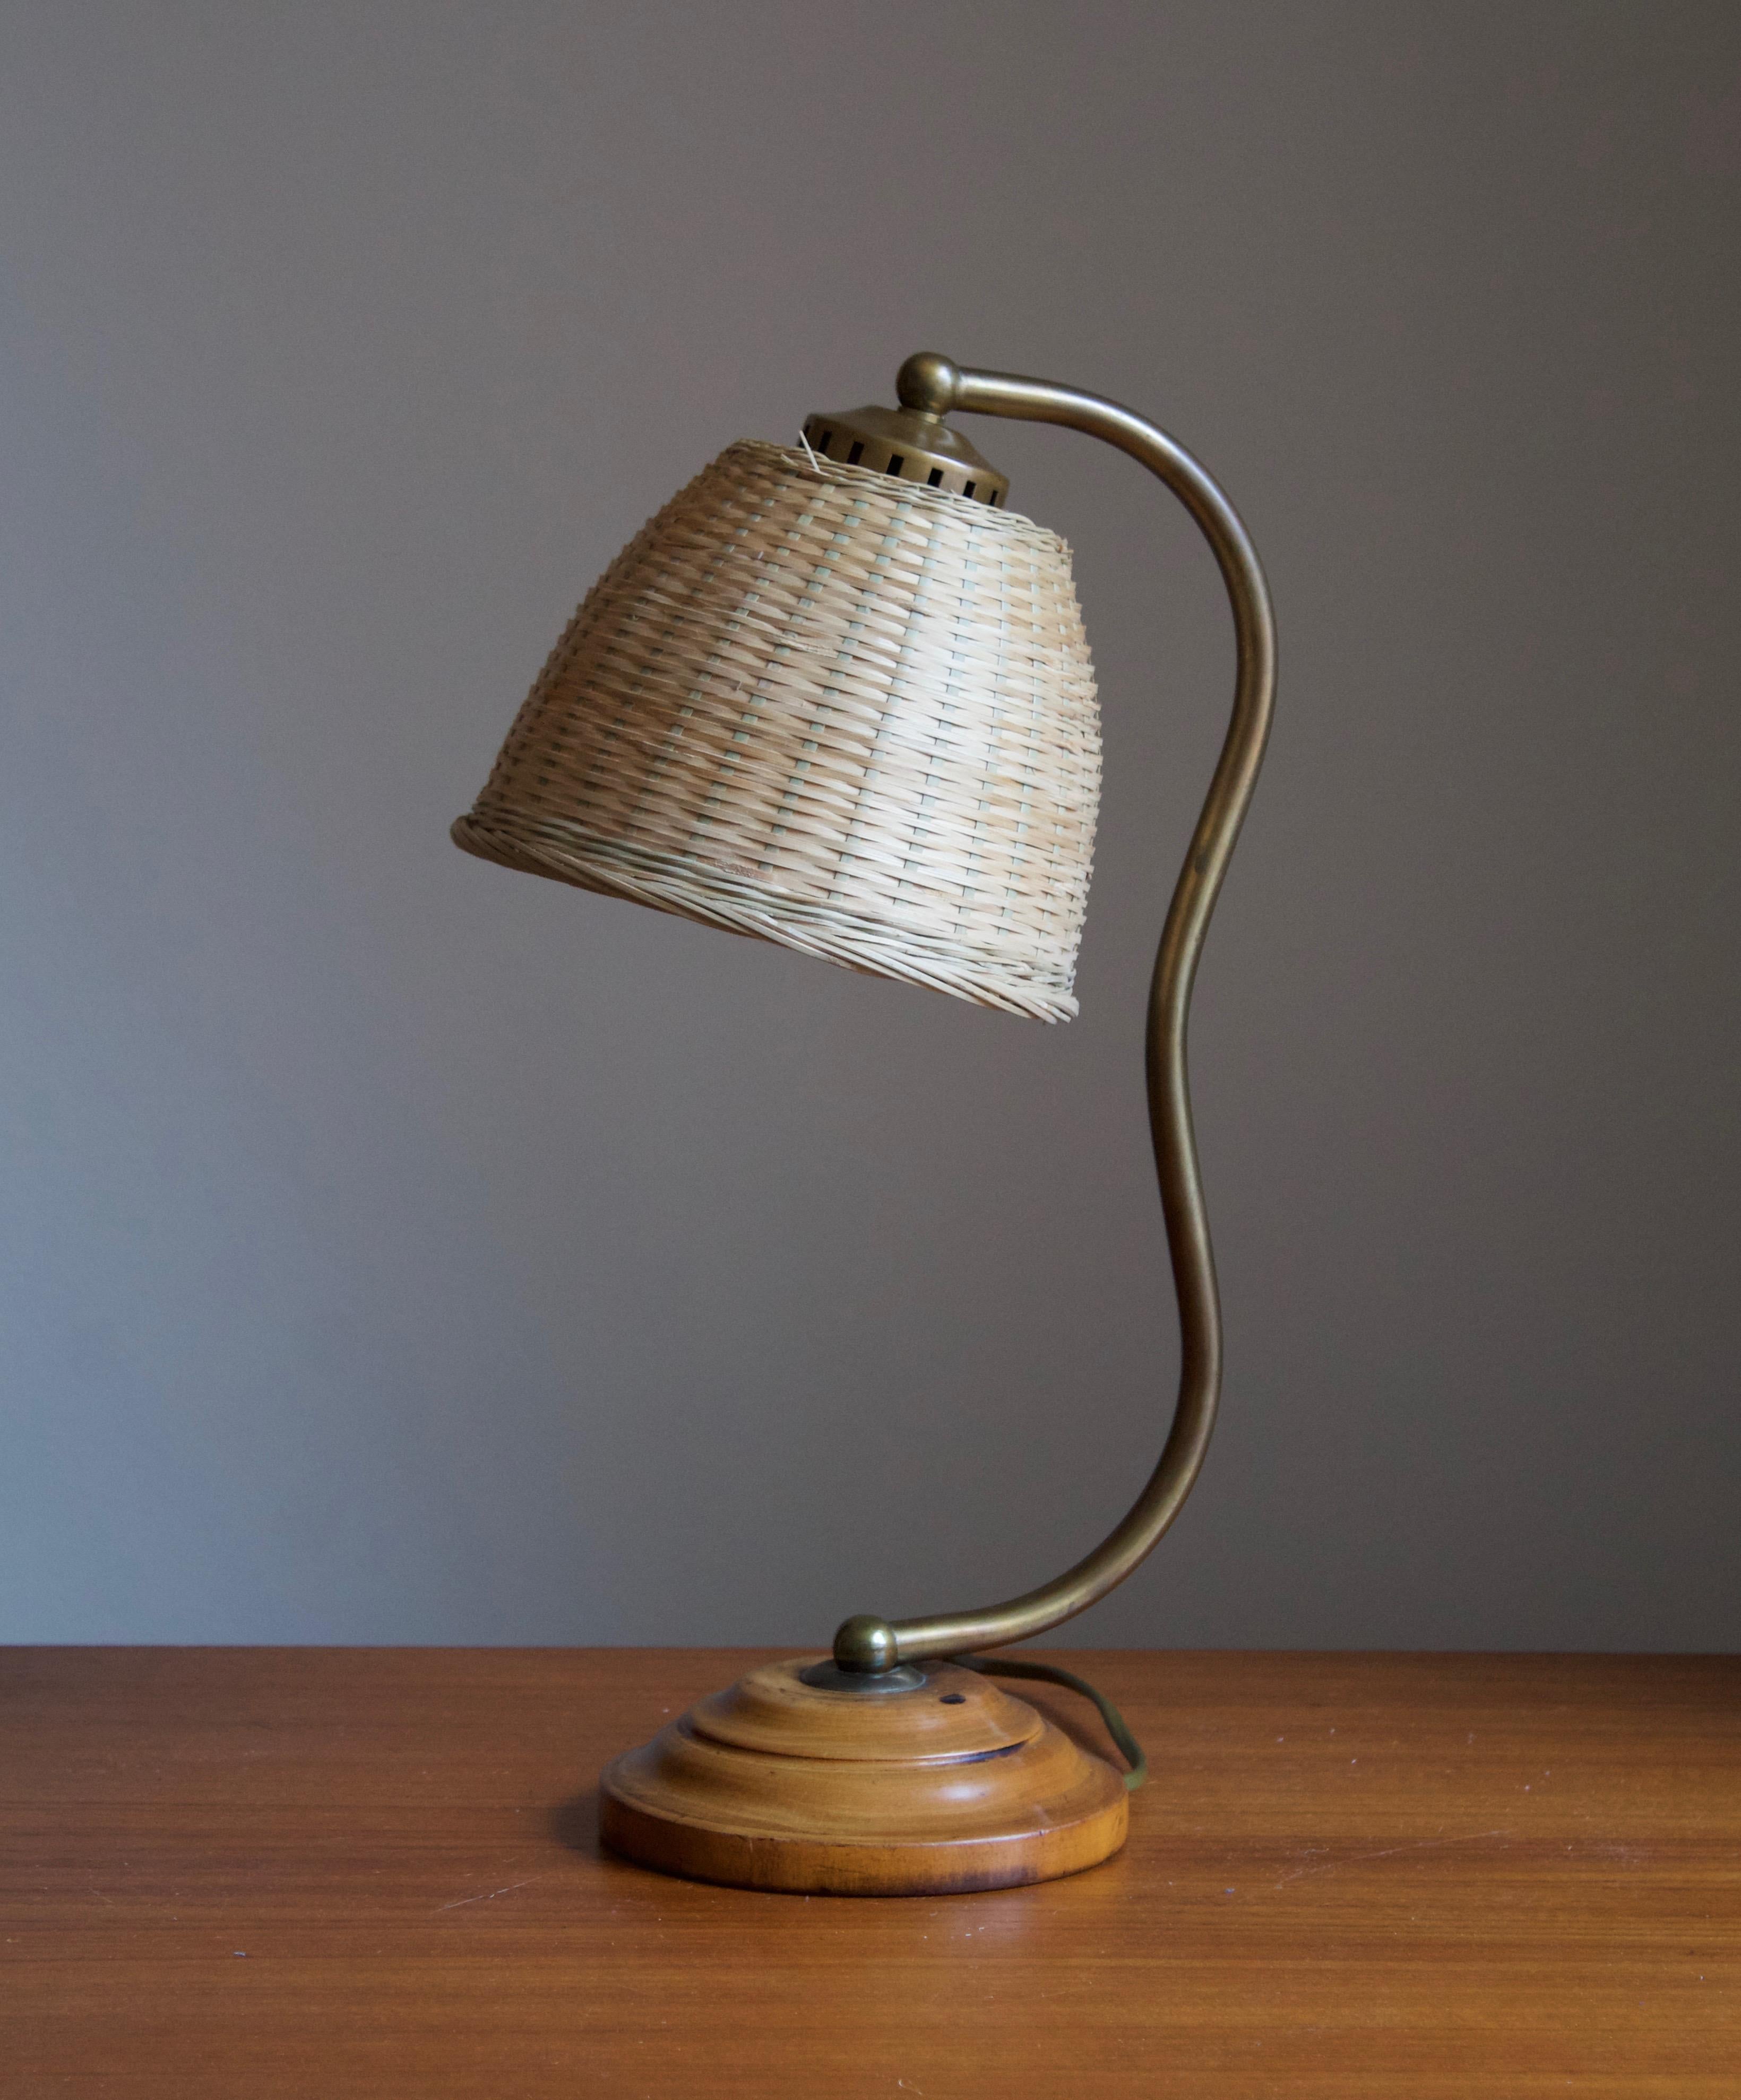 A table lamp, designed and produced in Sweden, circa 1930s. Features an organic brass rod on a wooden base. Assorted vintage rattan lampshade.